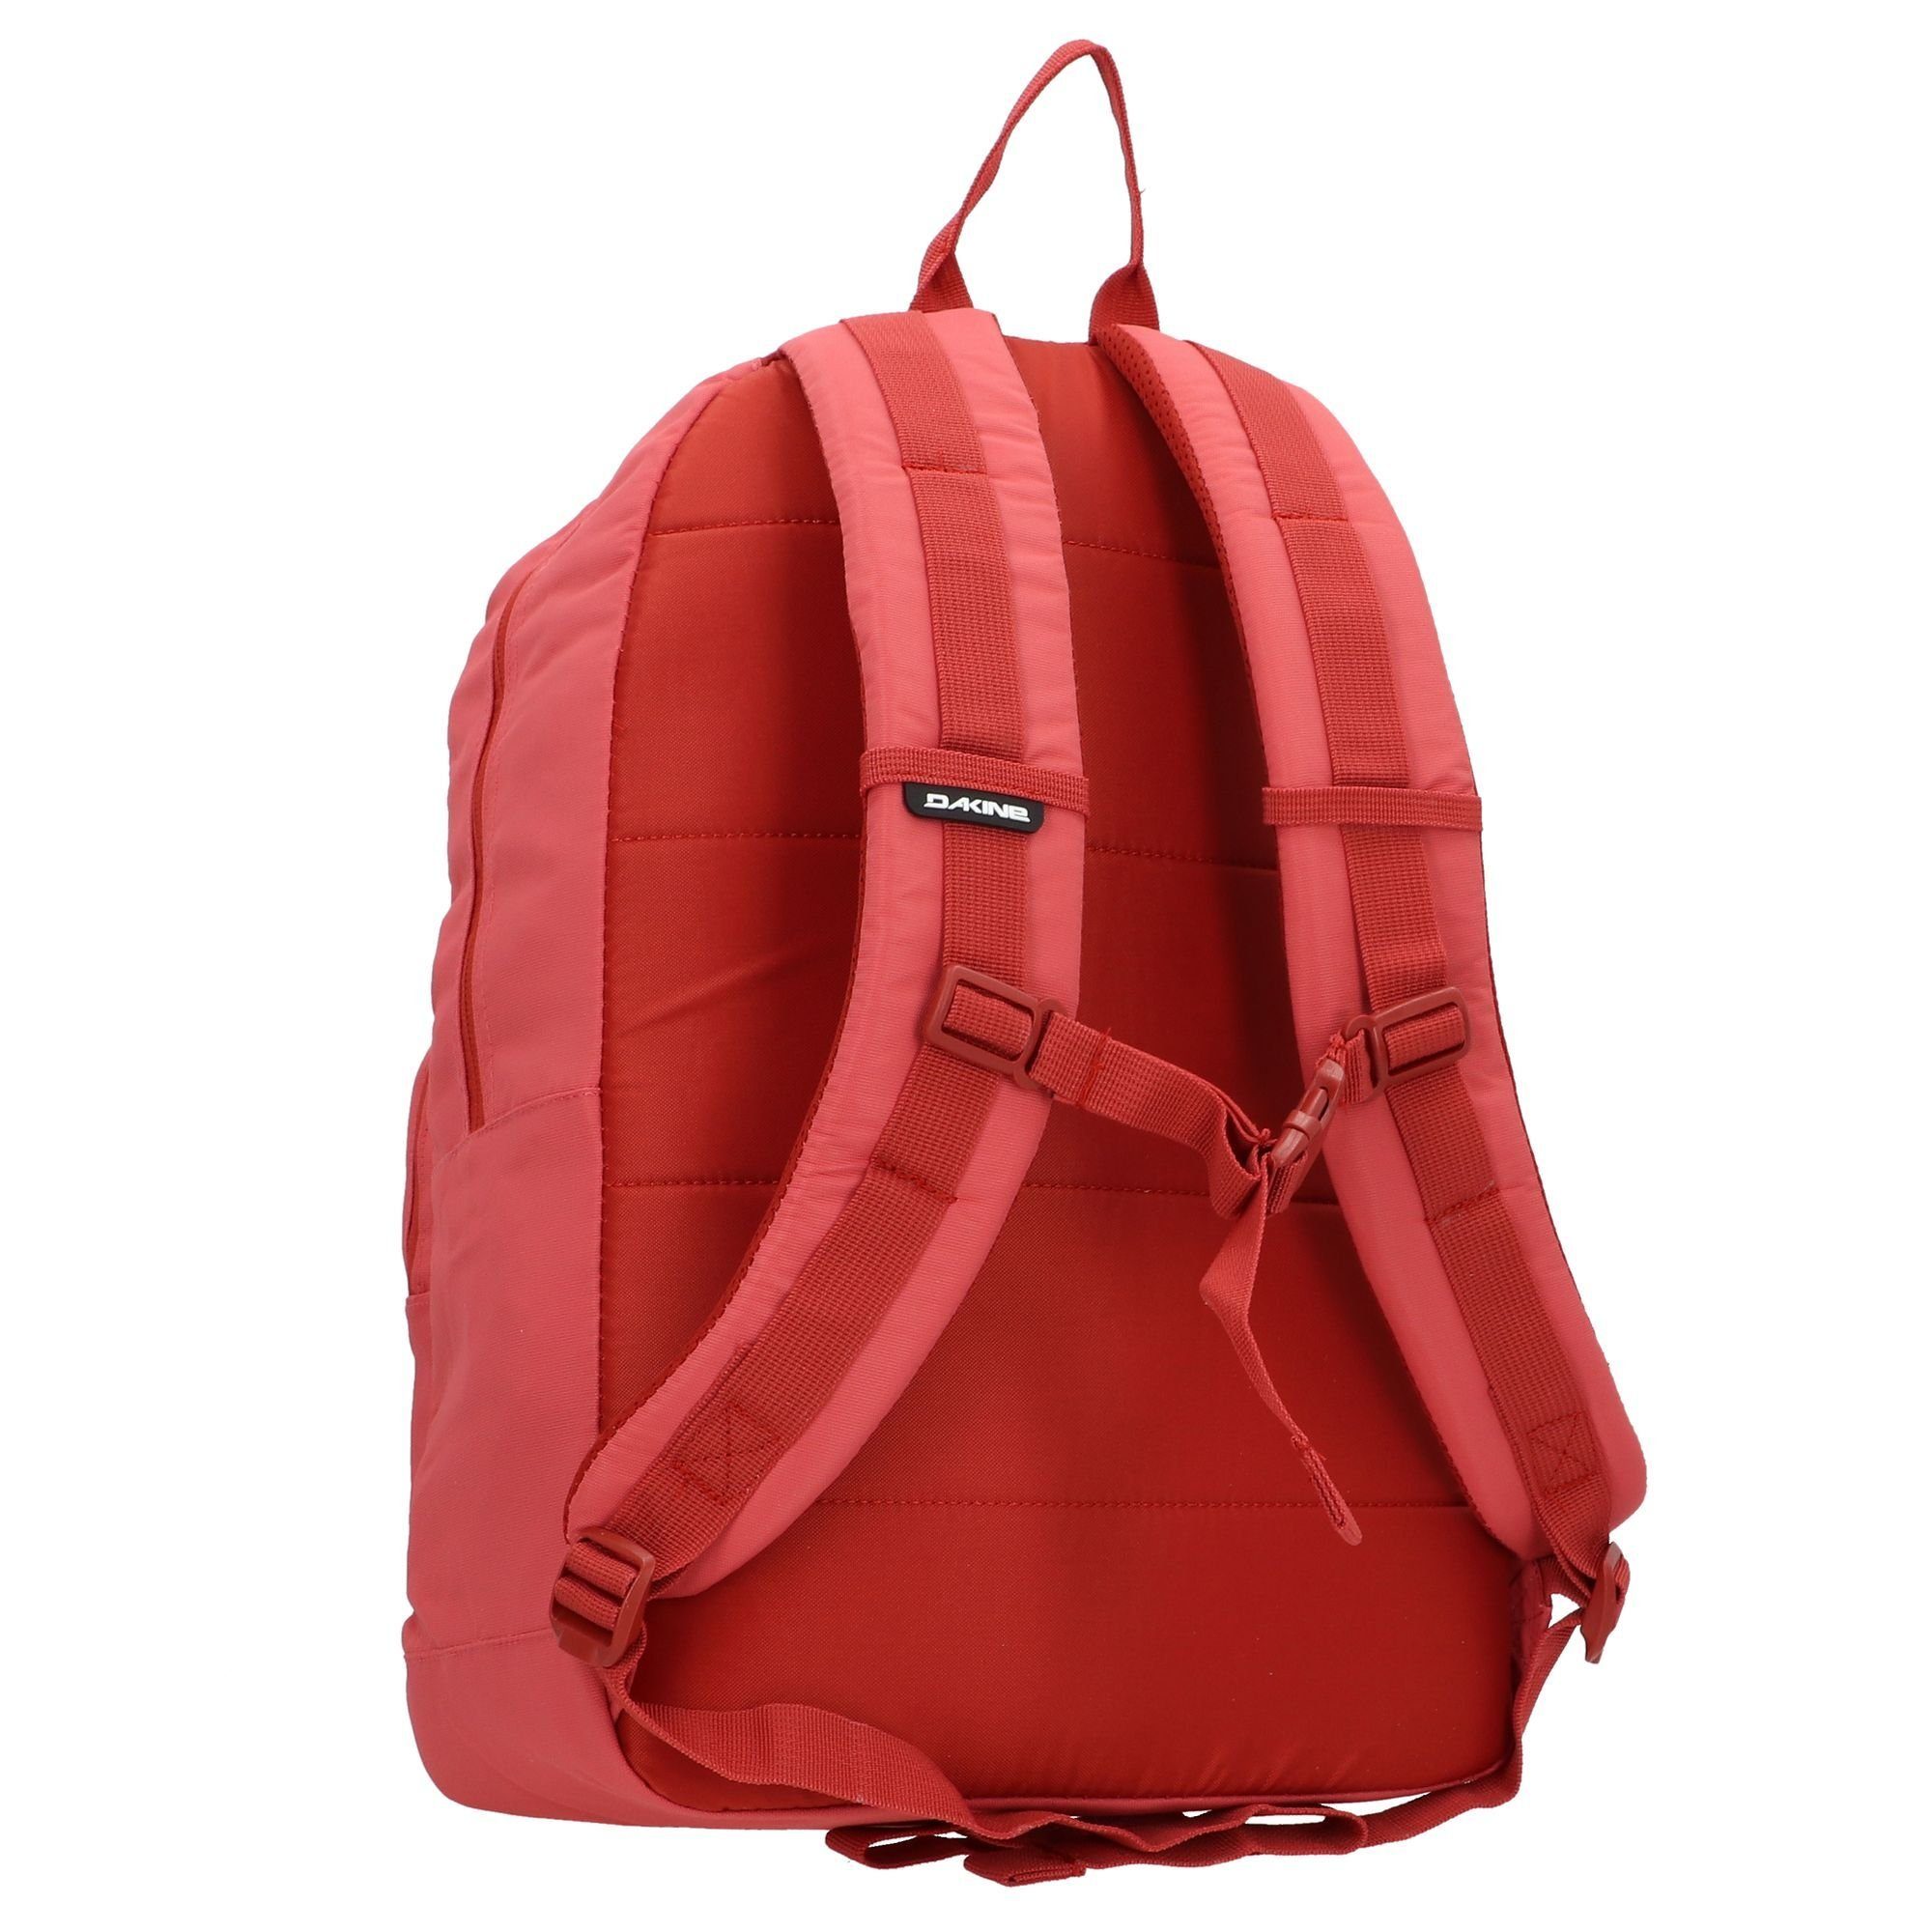 Dakine Daypack 365 PACK, red mineral Polyester